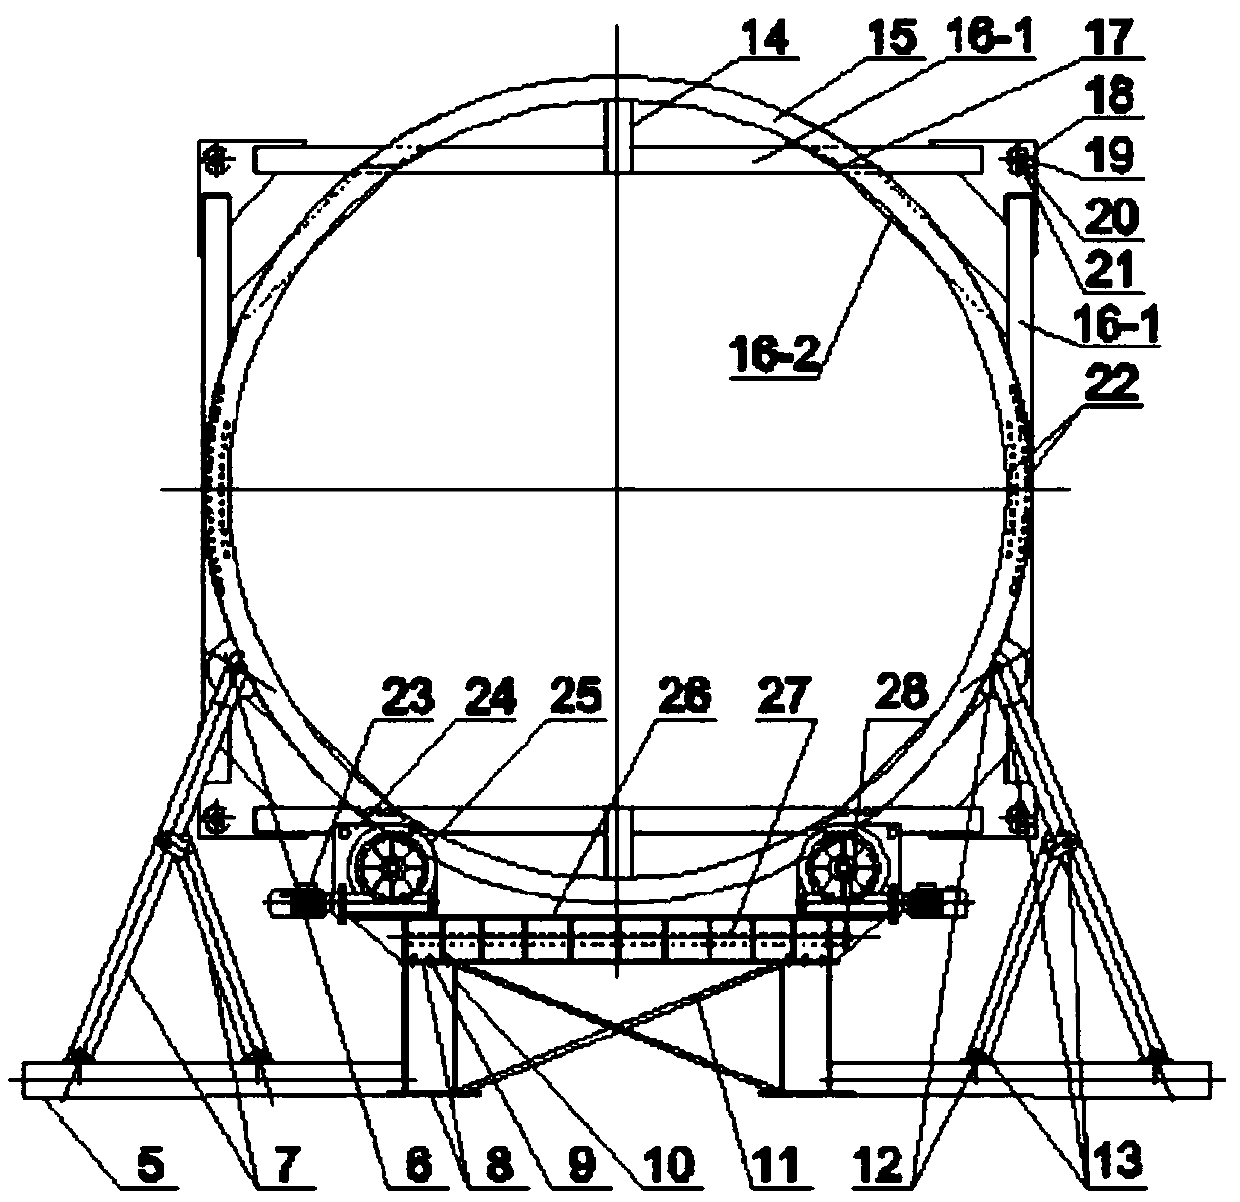 A method of welding modular steel frames using a rotating device